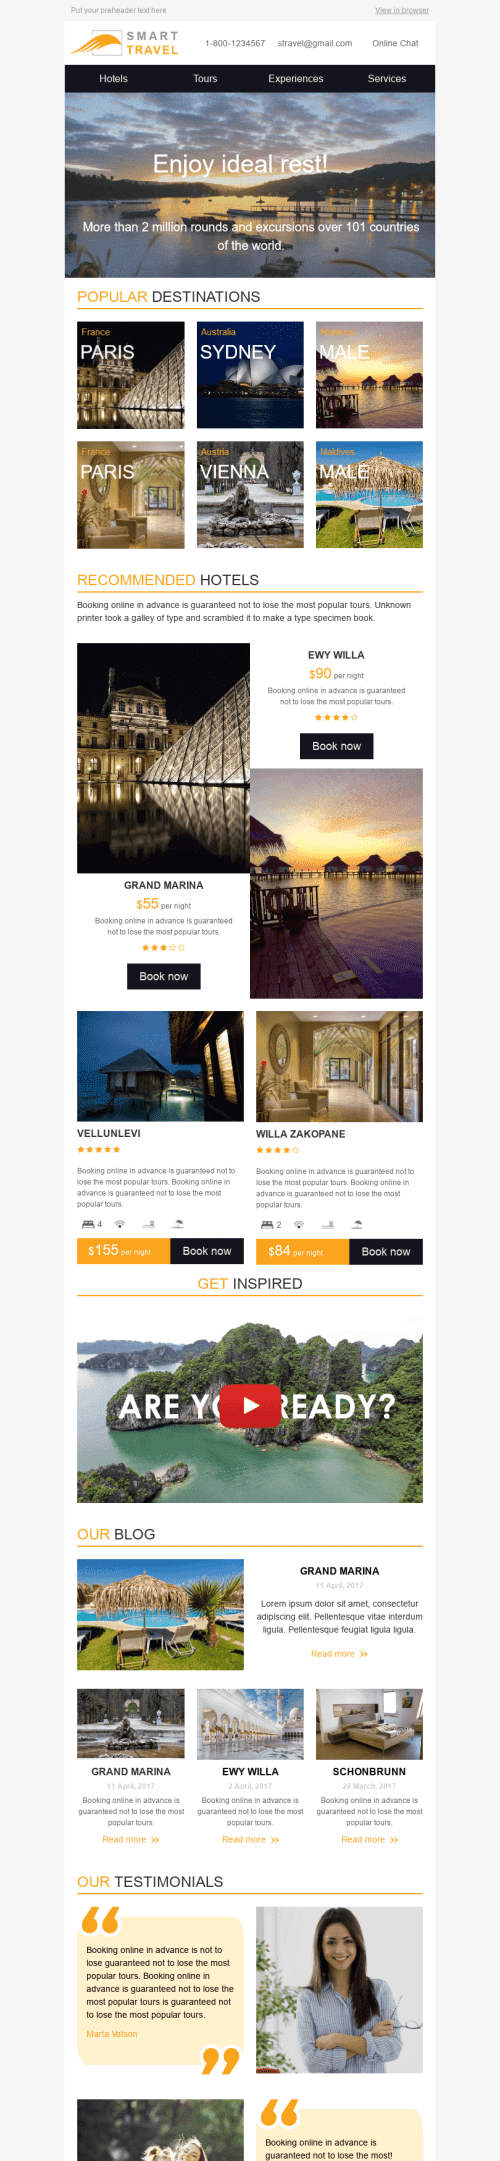 Promo Email Template "Round the World" for Tourism industry mobile view